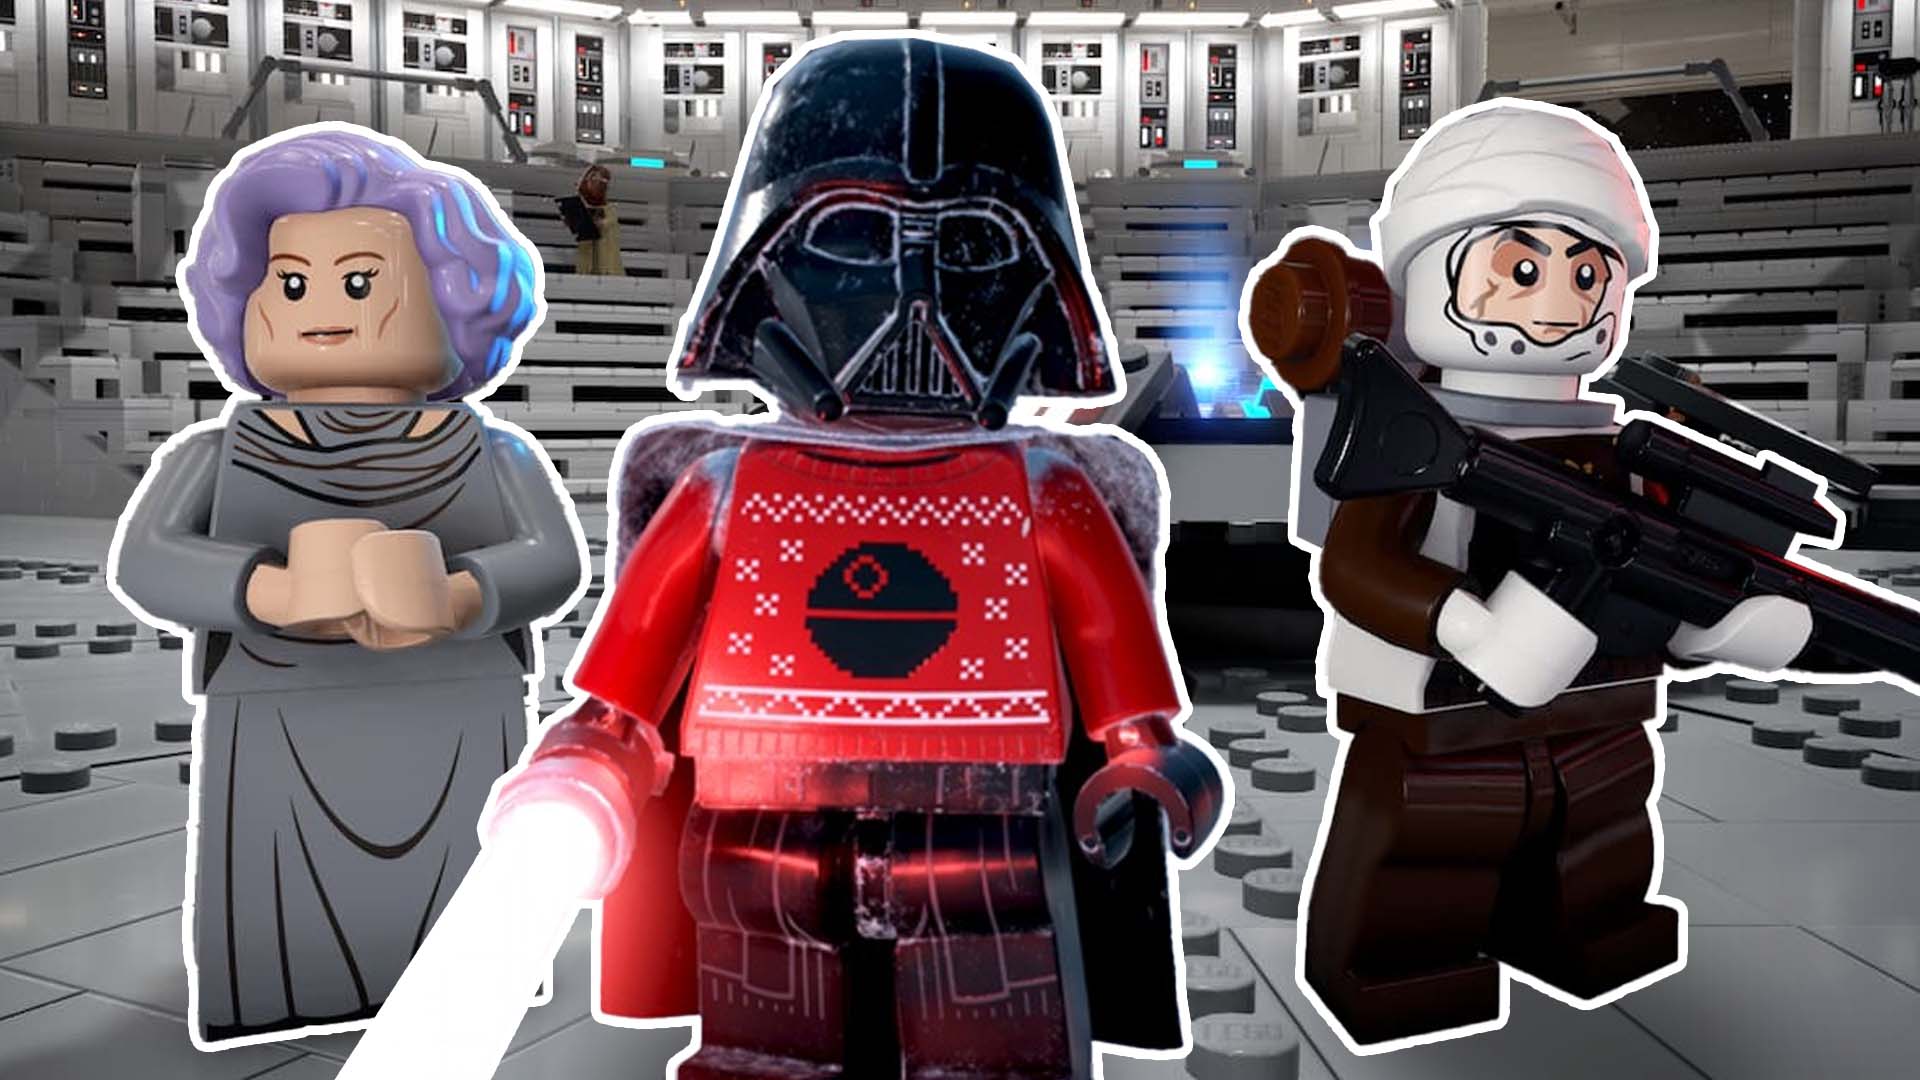 Codes To Unlock Secret Characters And Ships In Lego Star Wars: The